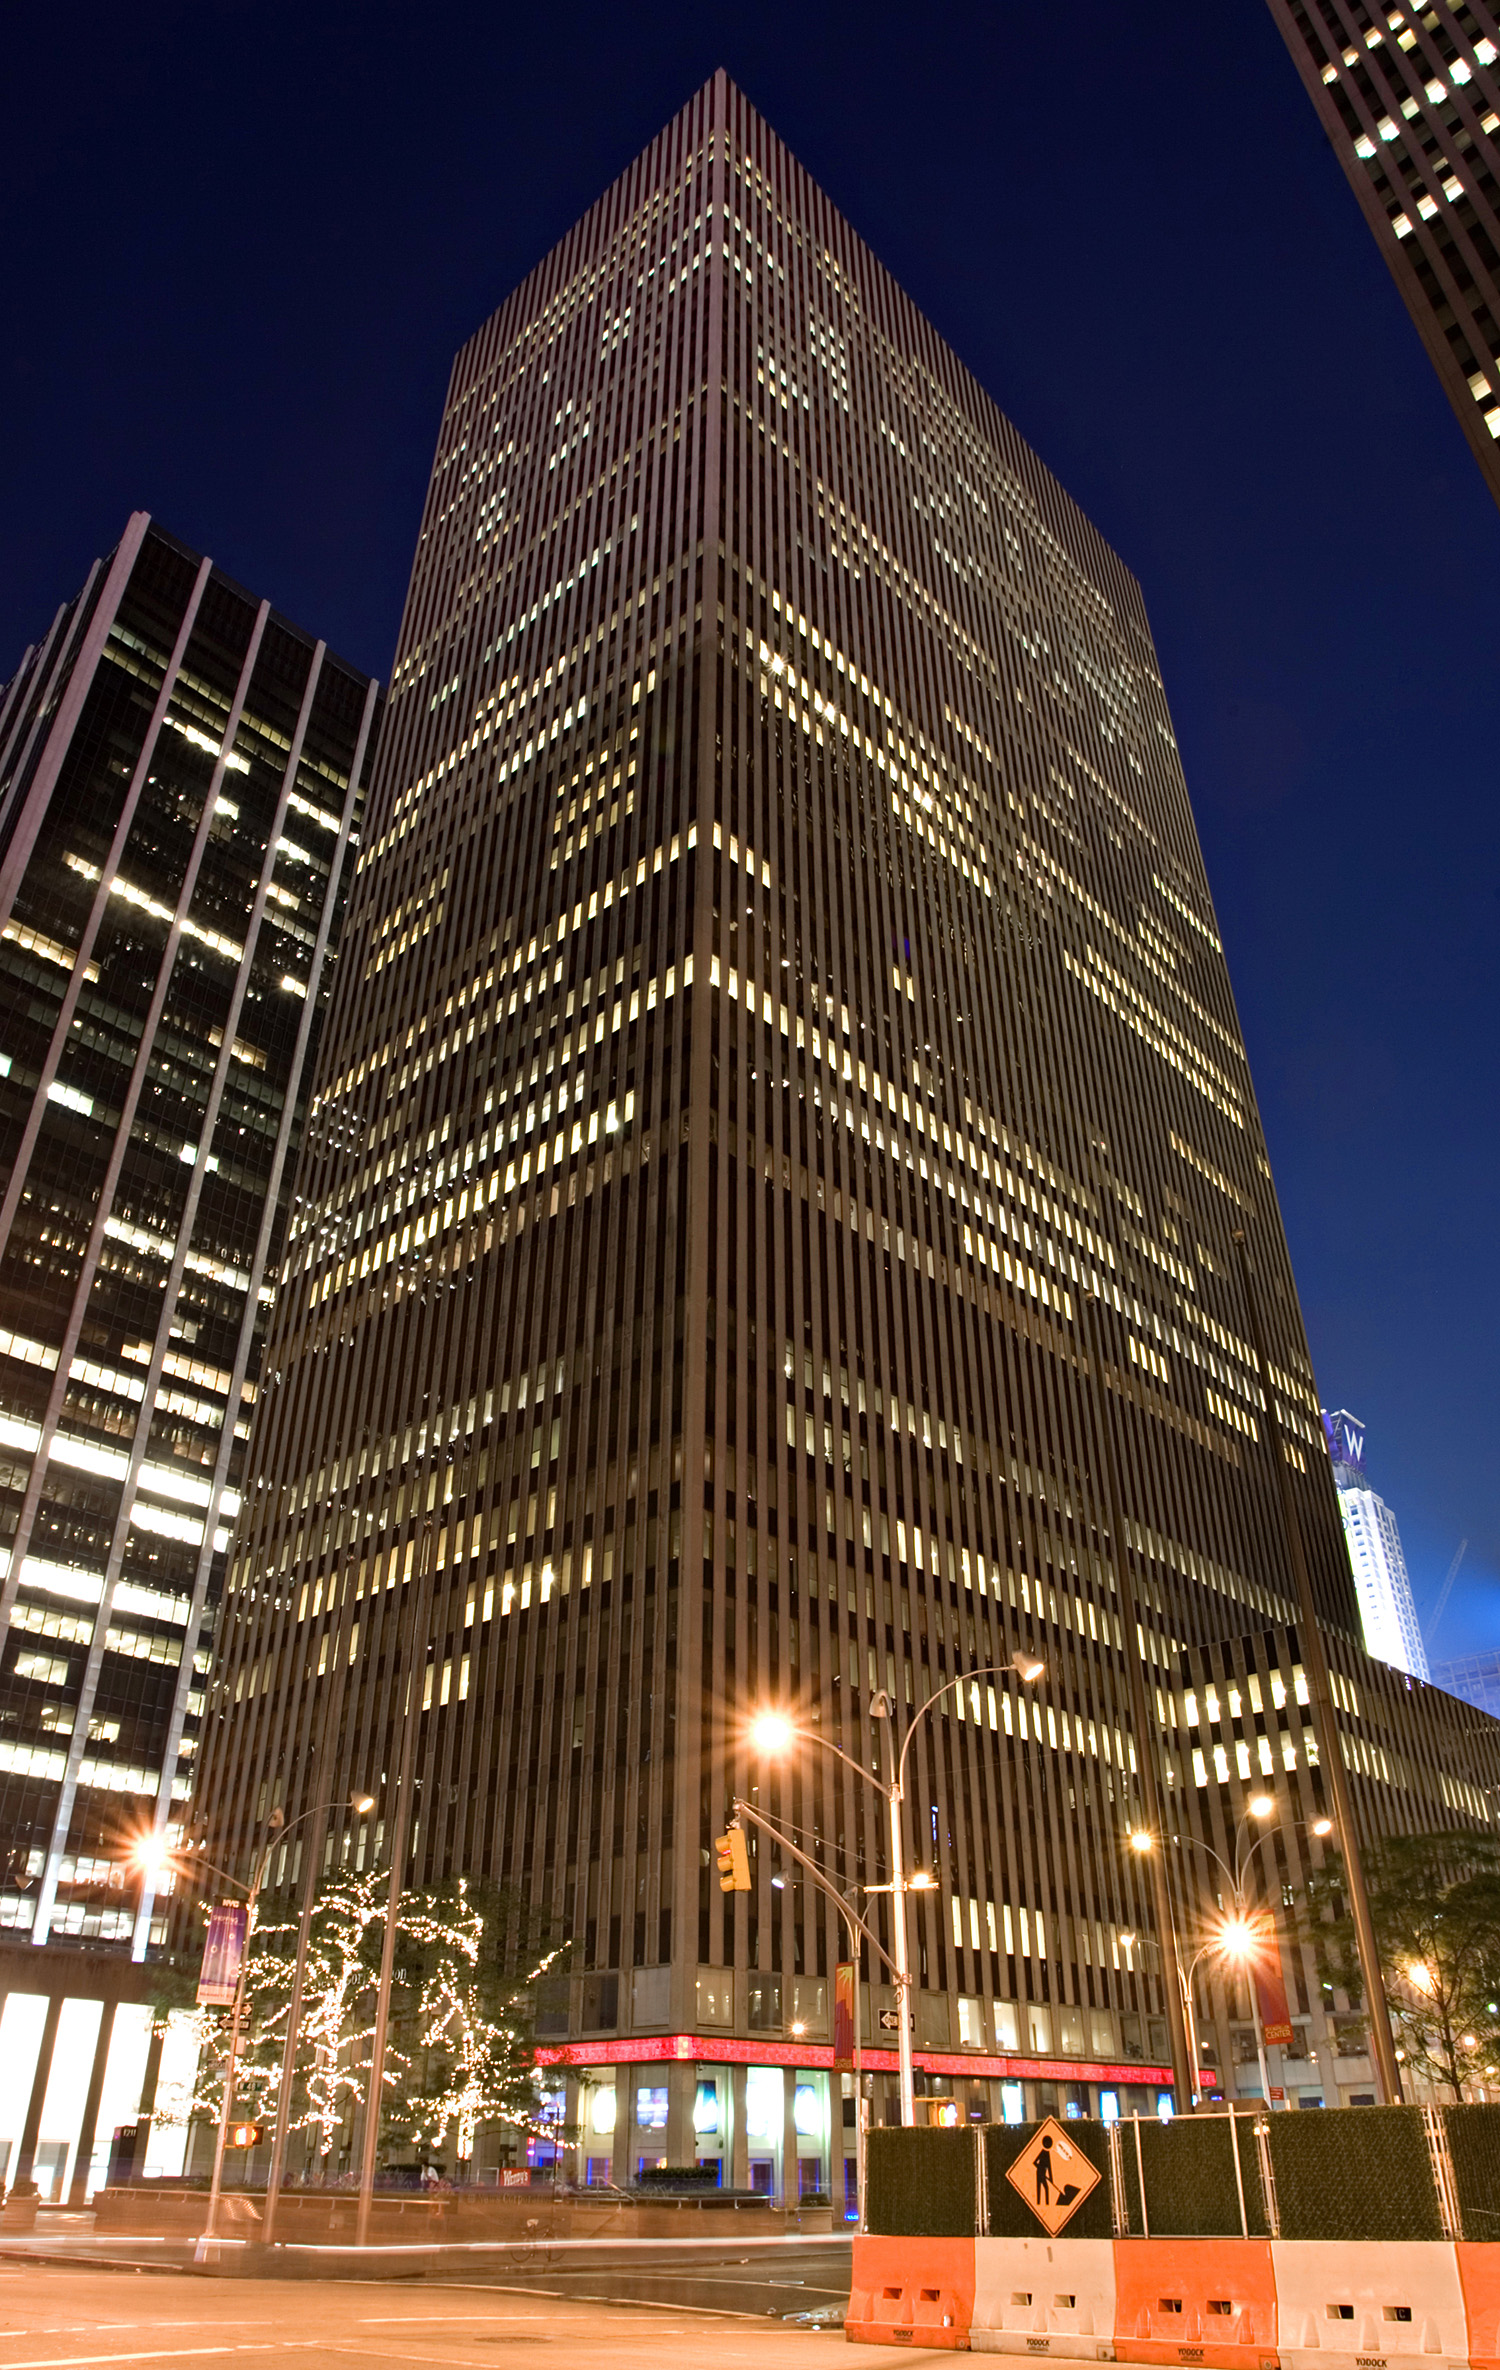 Celanese Building, New York City - Night view from the east. © Mathias Beinling